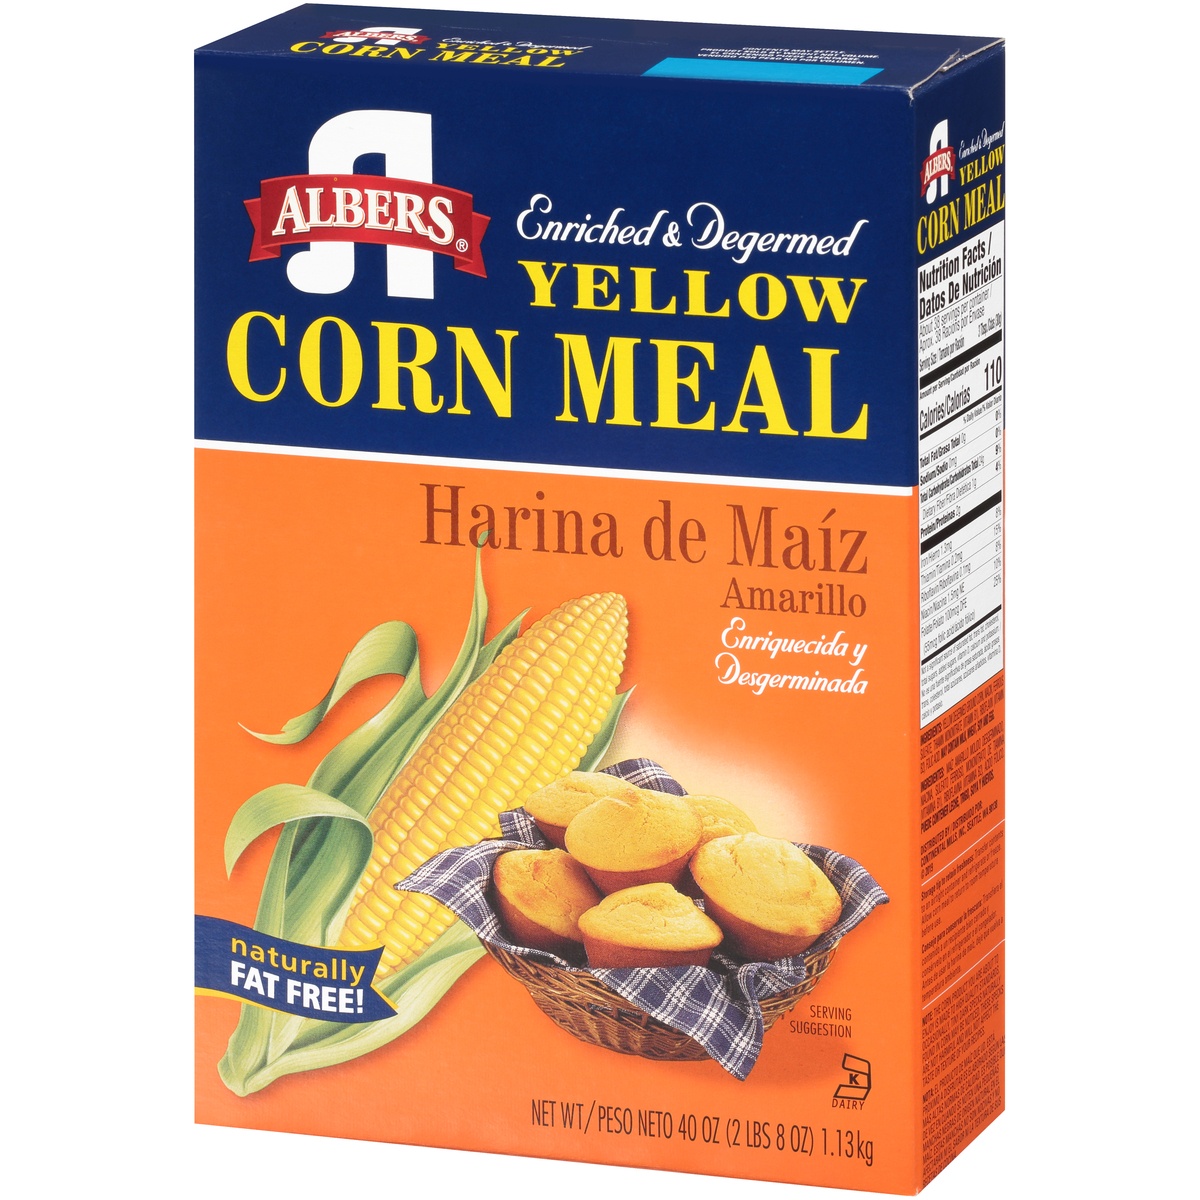 slide 3 of 11, Albers Enriched & Degermed Yellow Corn Meal, 2.5 lb